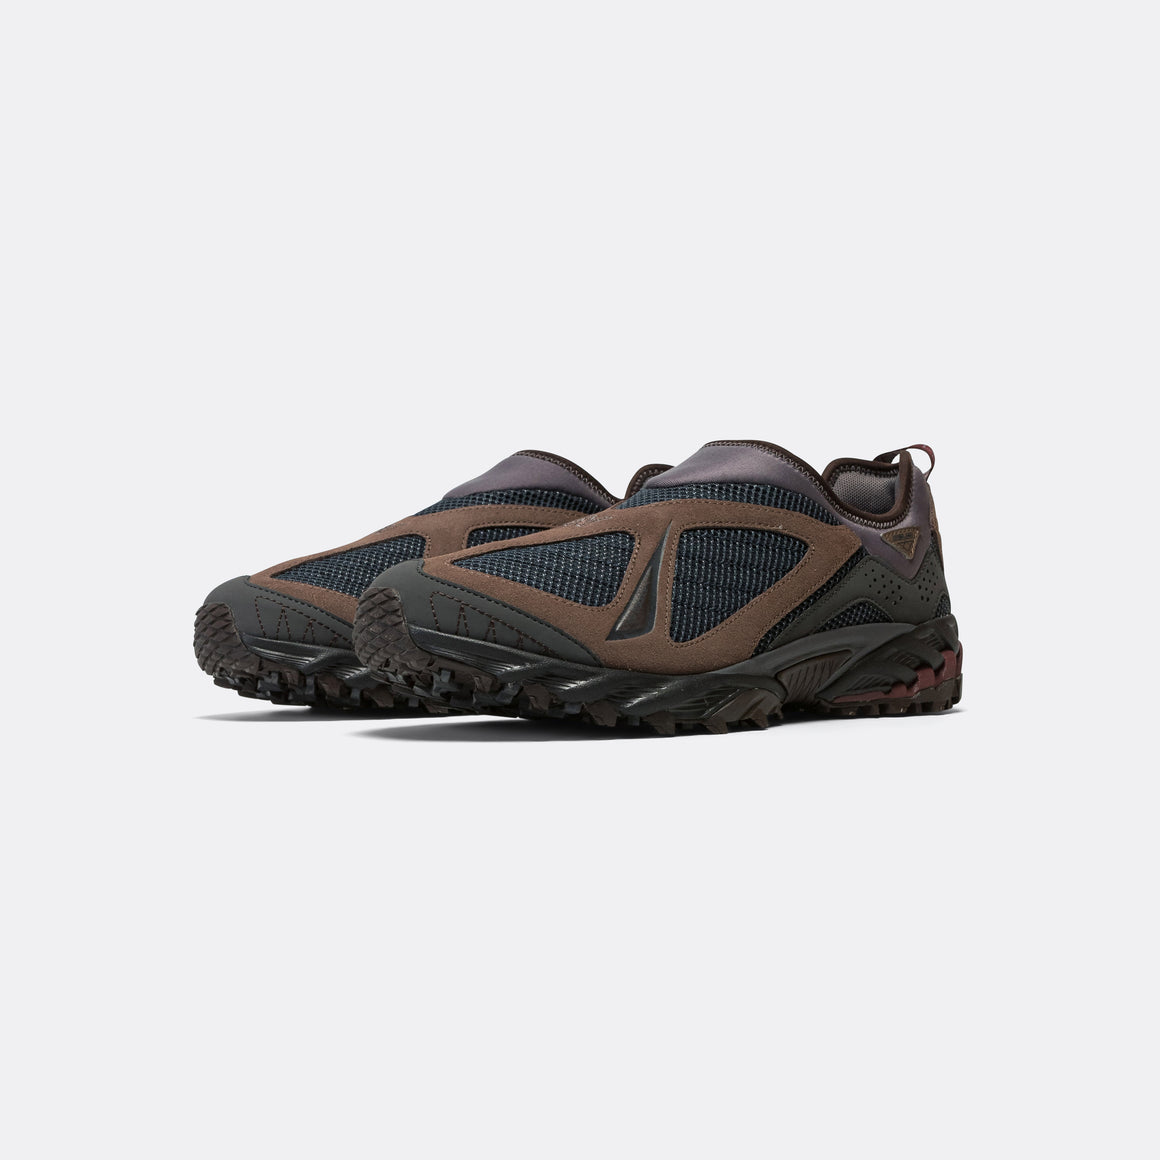 New Balance - TDS M610STT Trail MOC - UP THERE